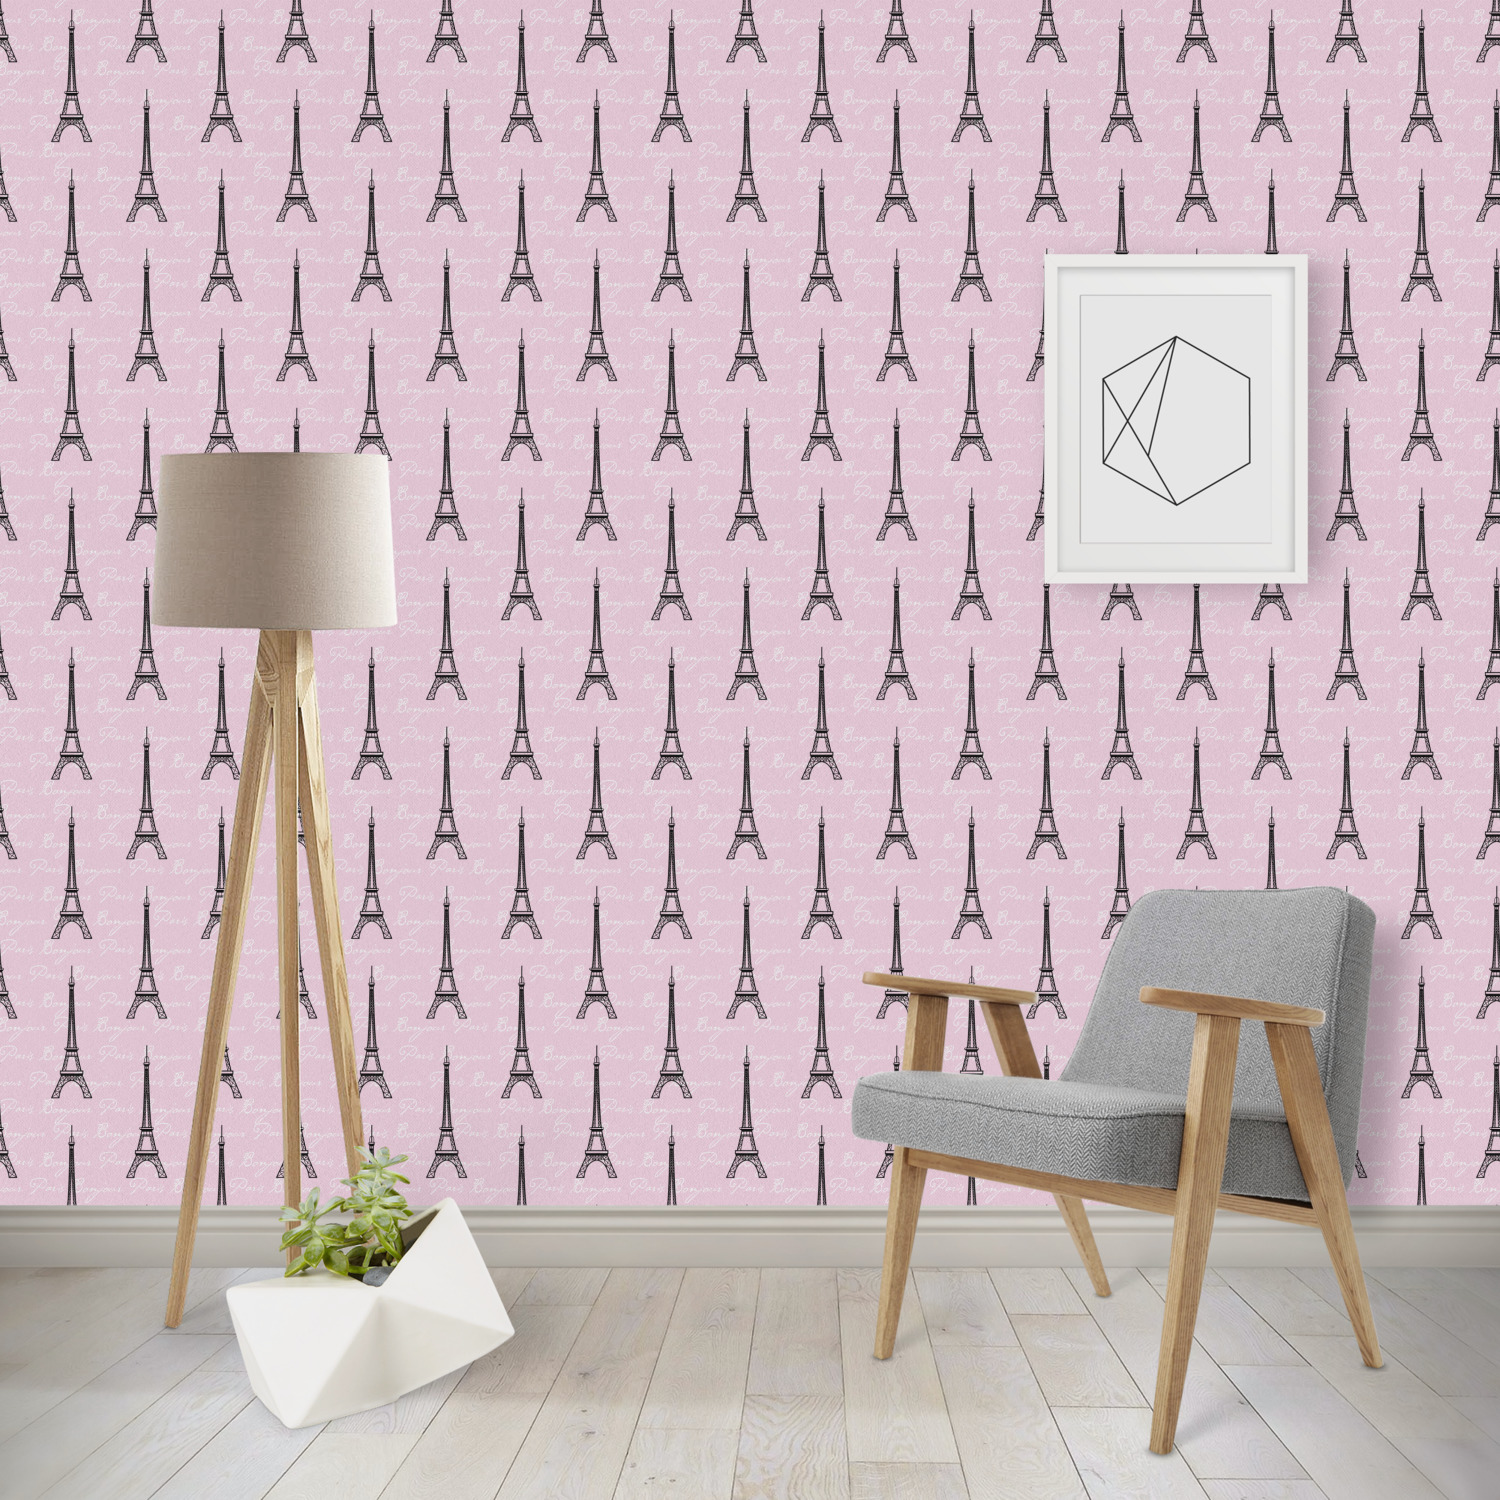 Paris Bonjour and Eiffel Tower Wallpaper & Surface Covering - YouCustomizeIt